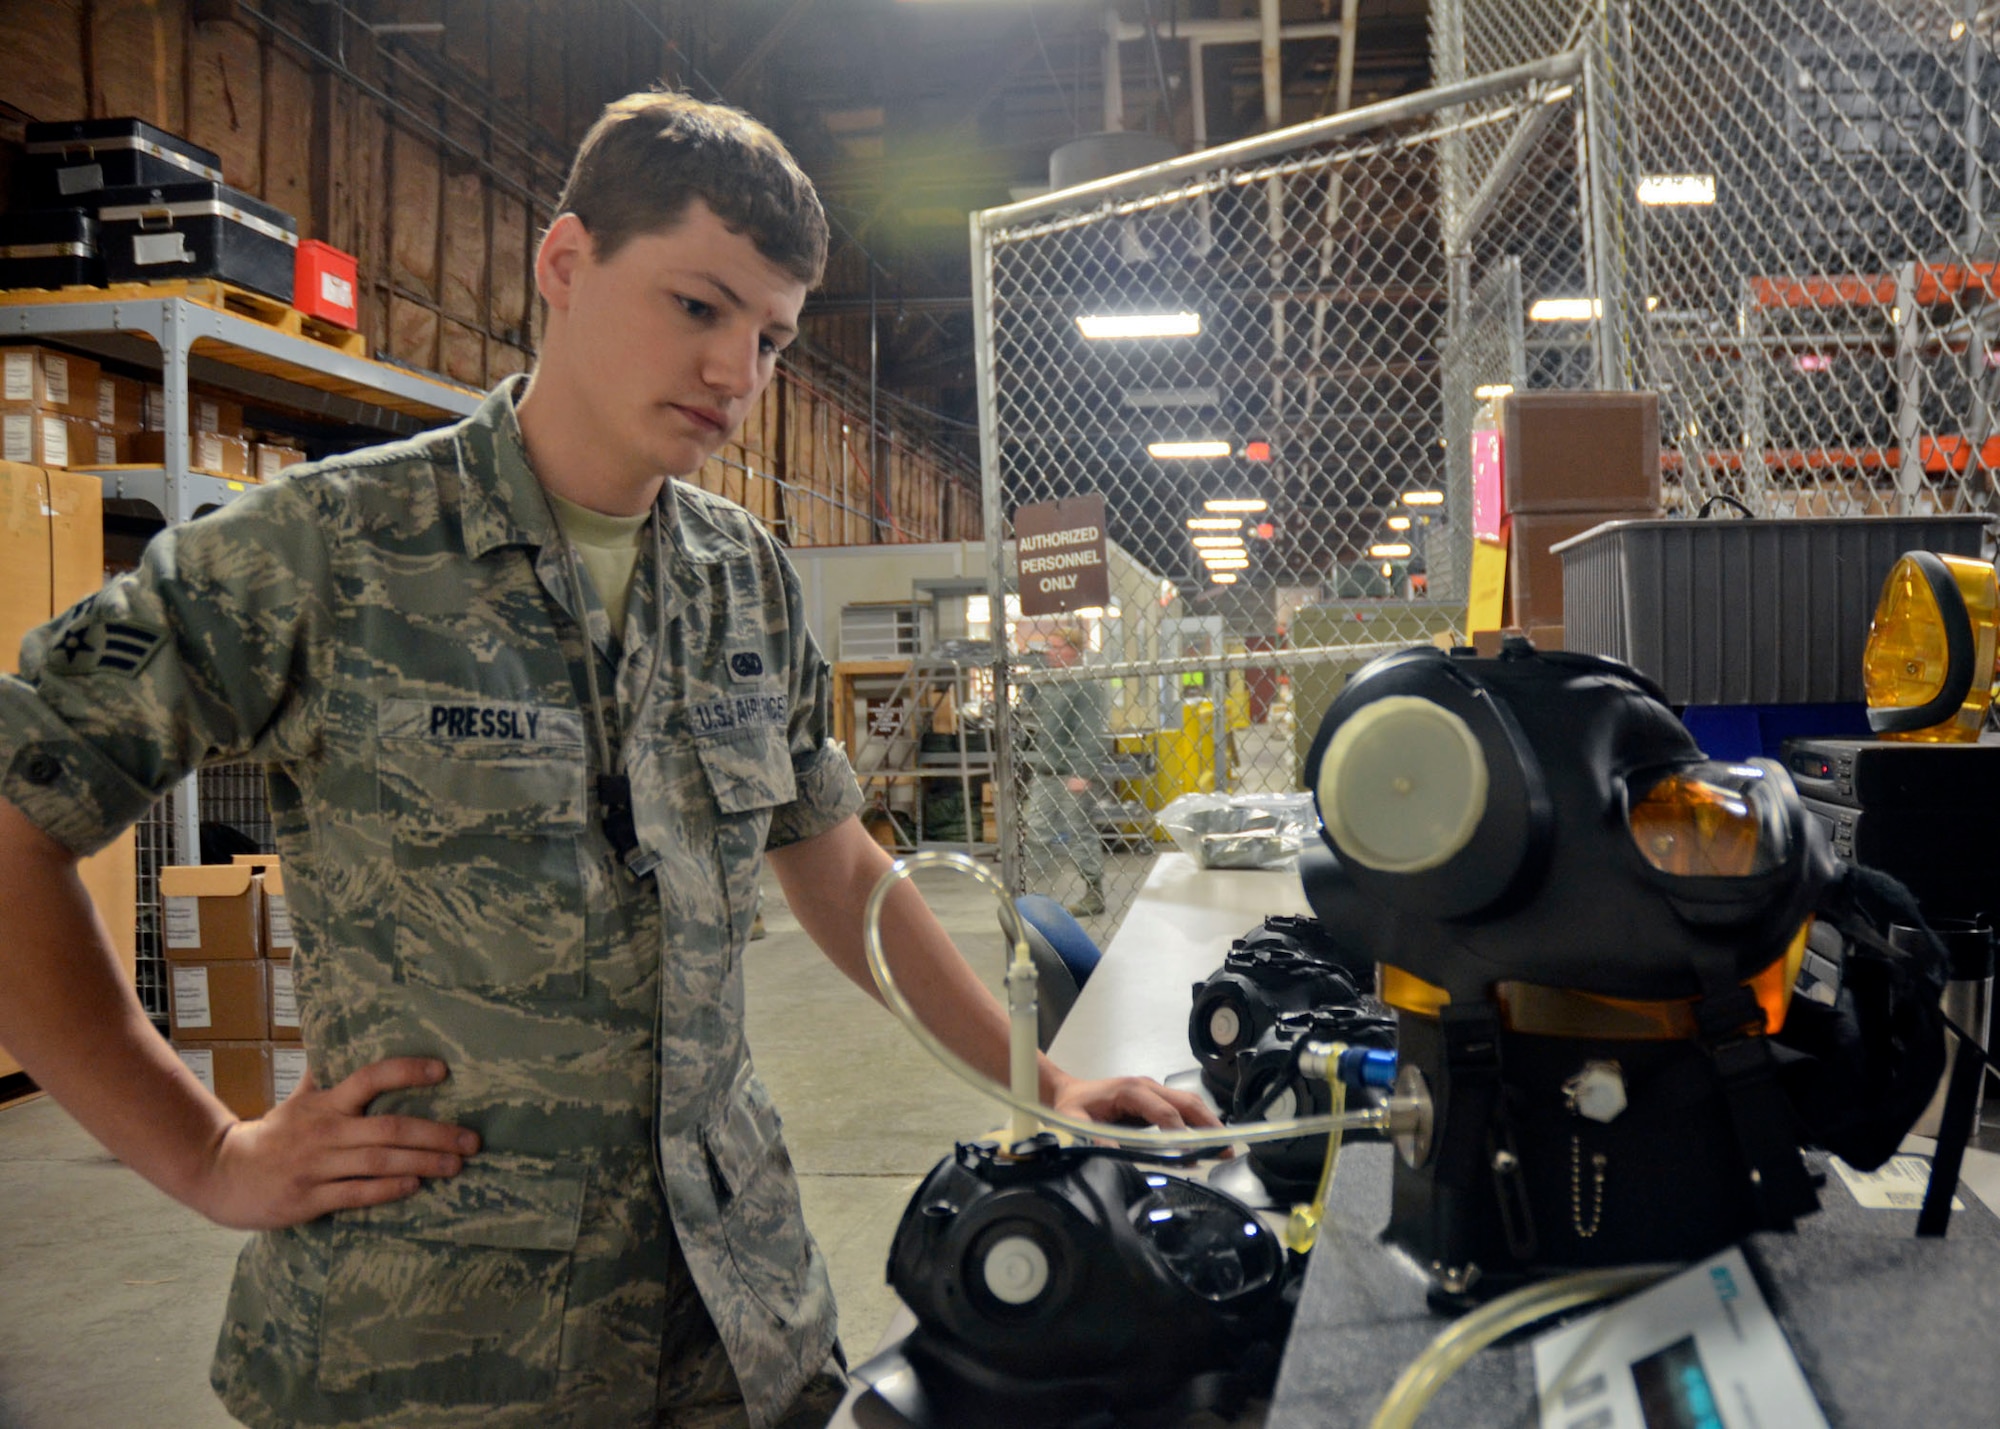 Missouri Air National Guard Senior Airman Jeremiah Pressly, of the 131st Logstics Readiness Squadron, tests gas masks that will be issued members of the 131st Bomb Wing during the unit training assembly May 4. (U.S. Air National Guard photo by Staff Sgt. Sean Navarro/RELEASED)